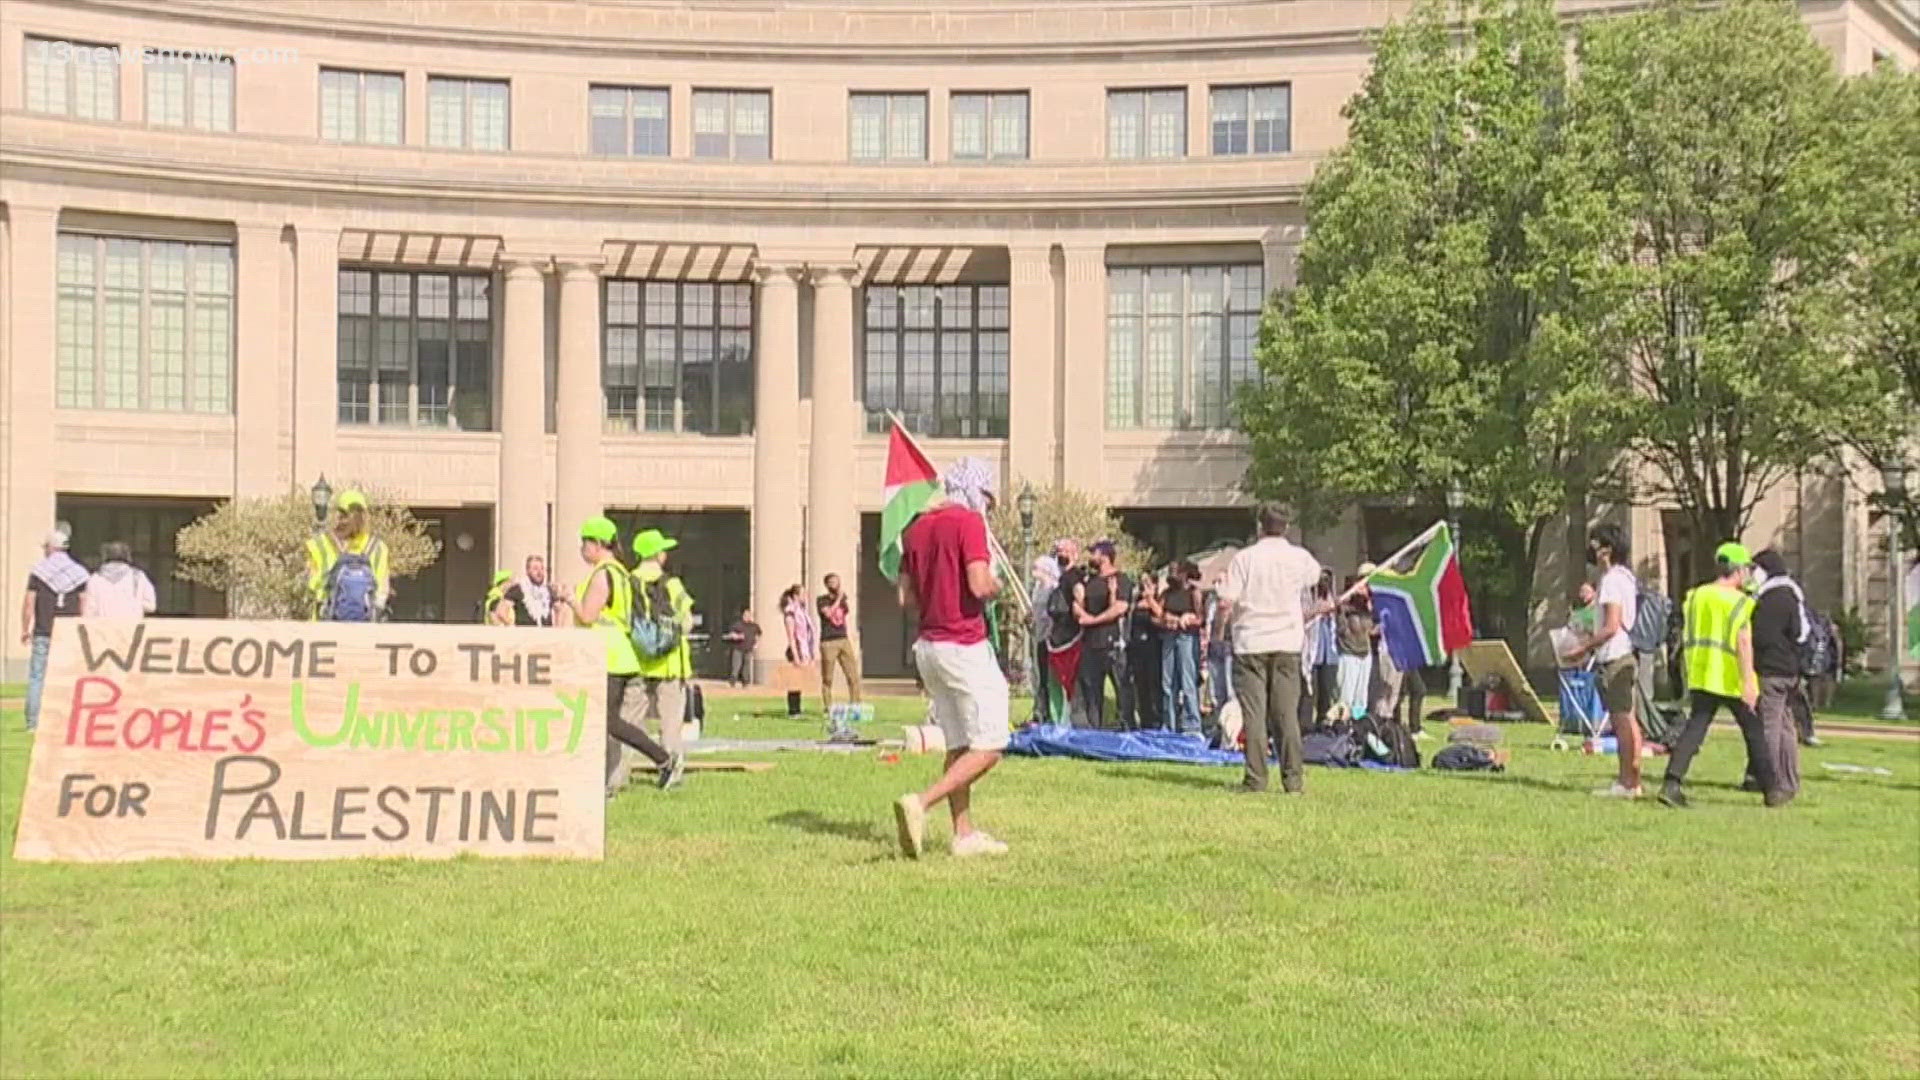 Amid escalating pro-Palestinian protests at college campuses nationwide, lawmakers and the white house spoke out.